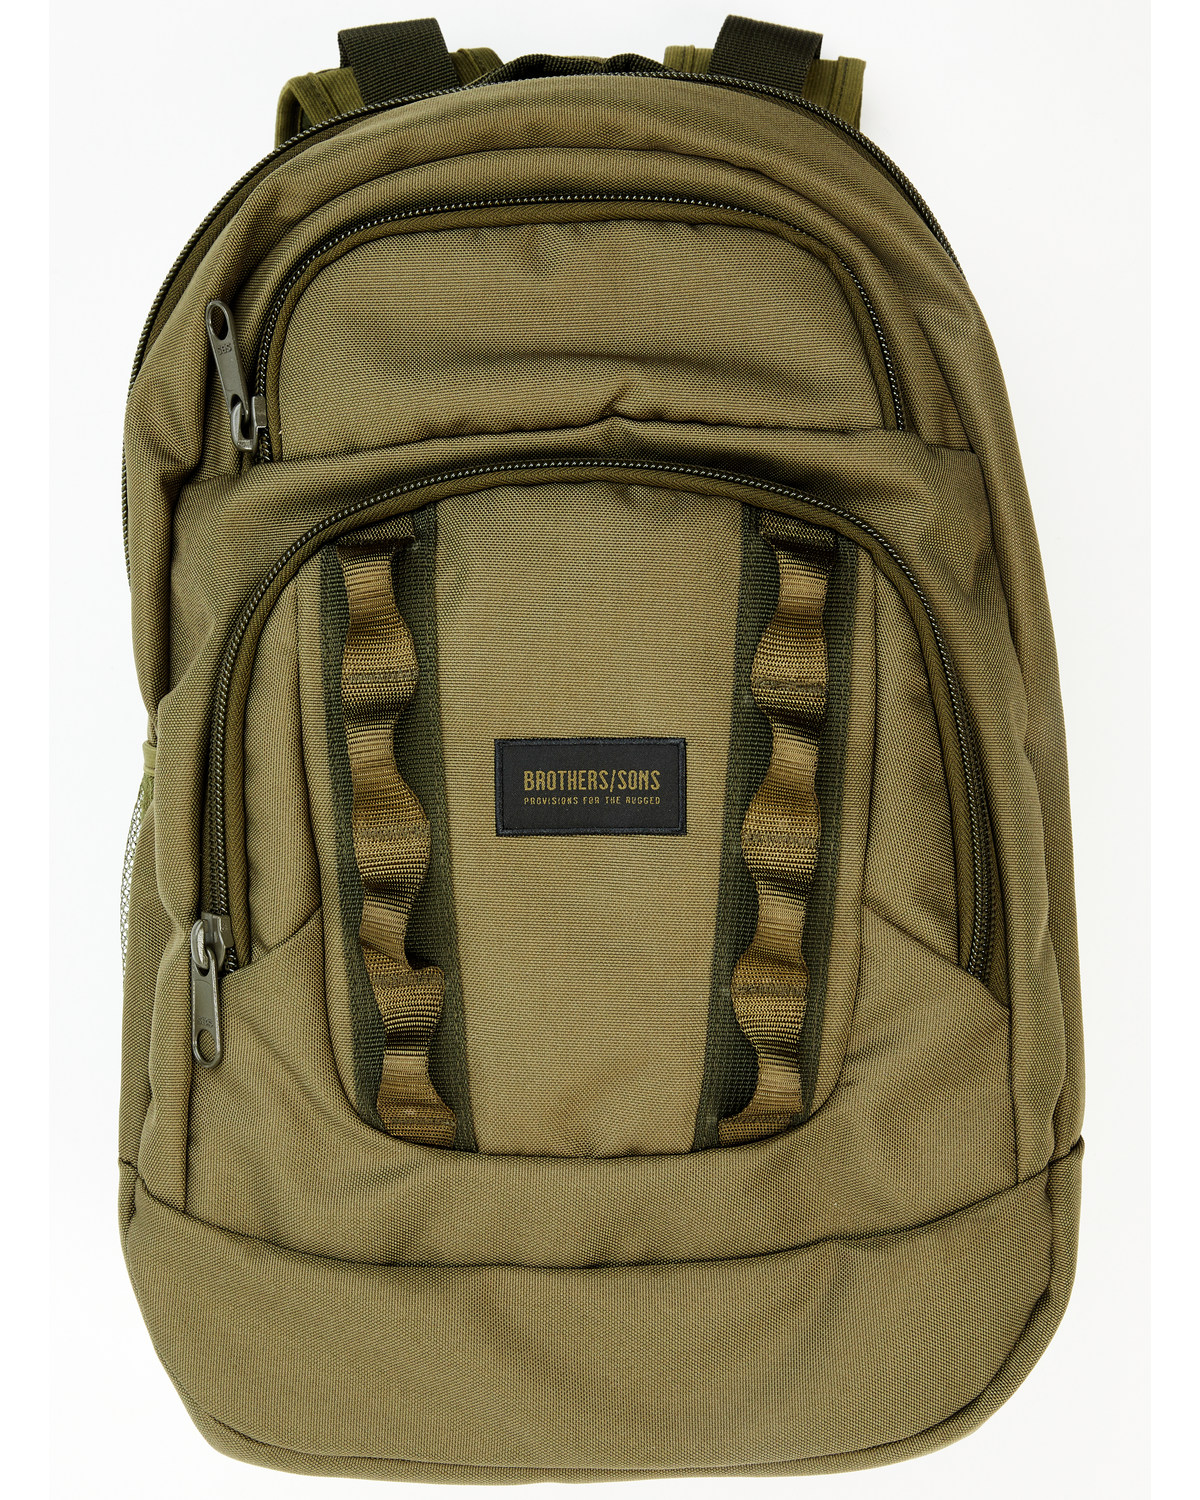 Brothers and Sons Men's Solid Backpack